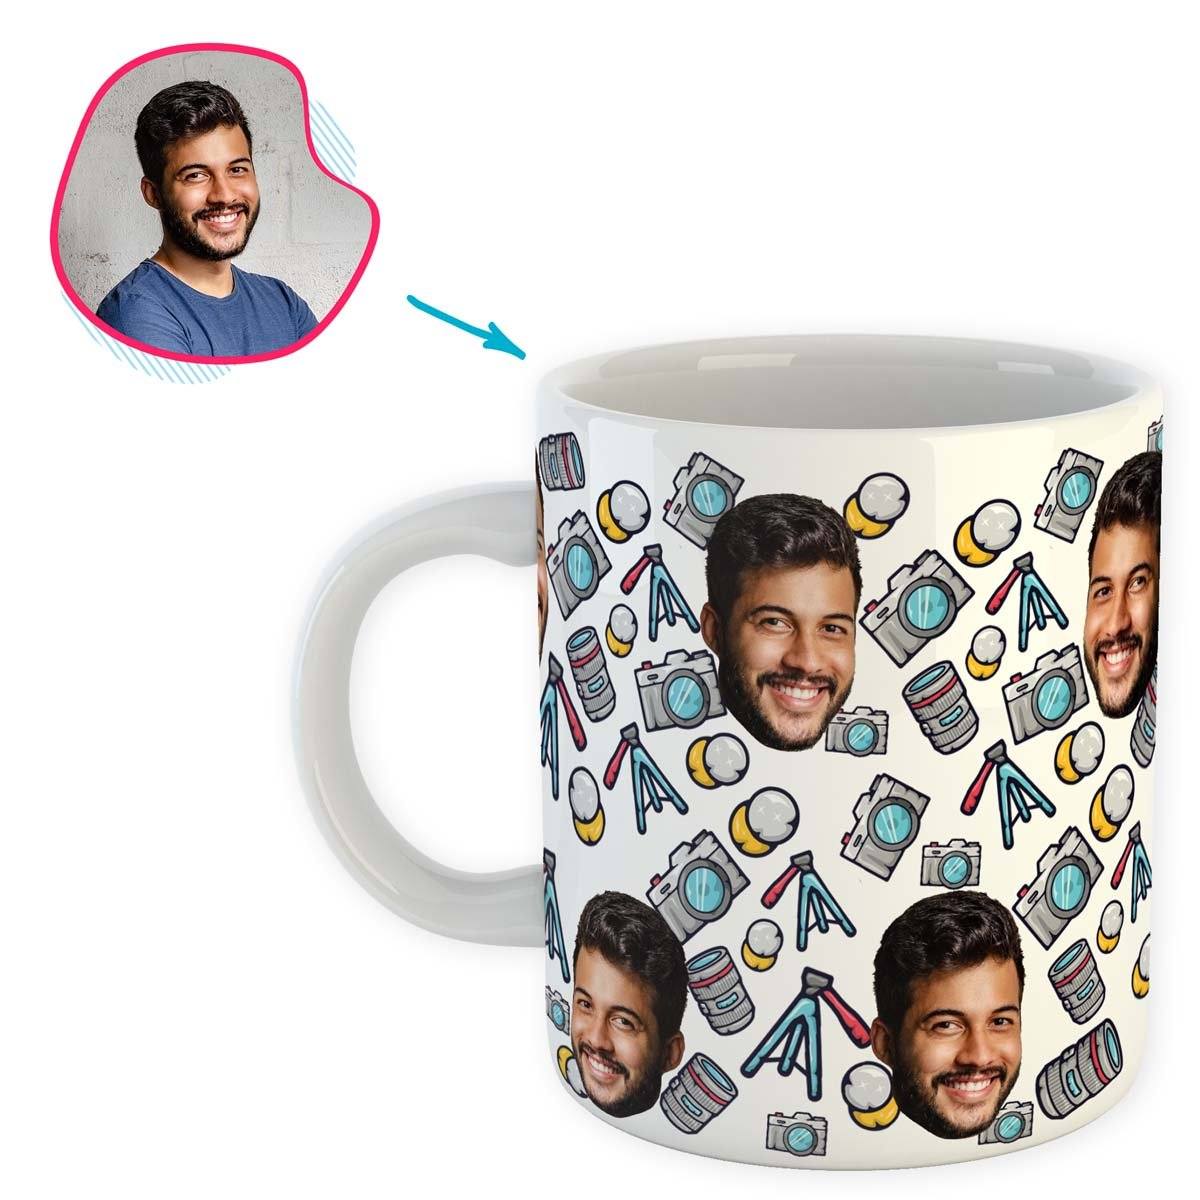 white Photography mug personalized with photo of face printed on it